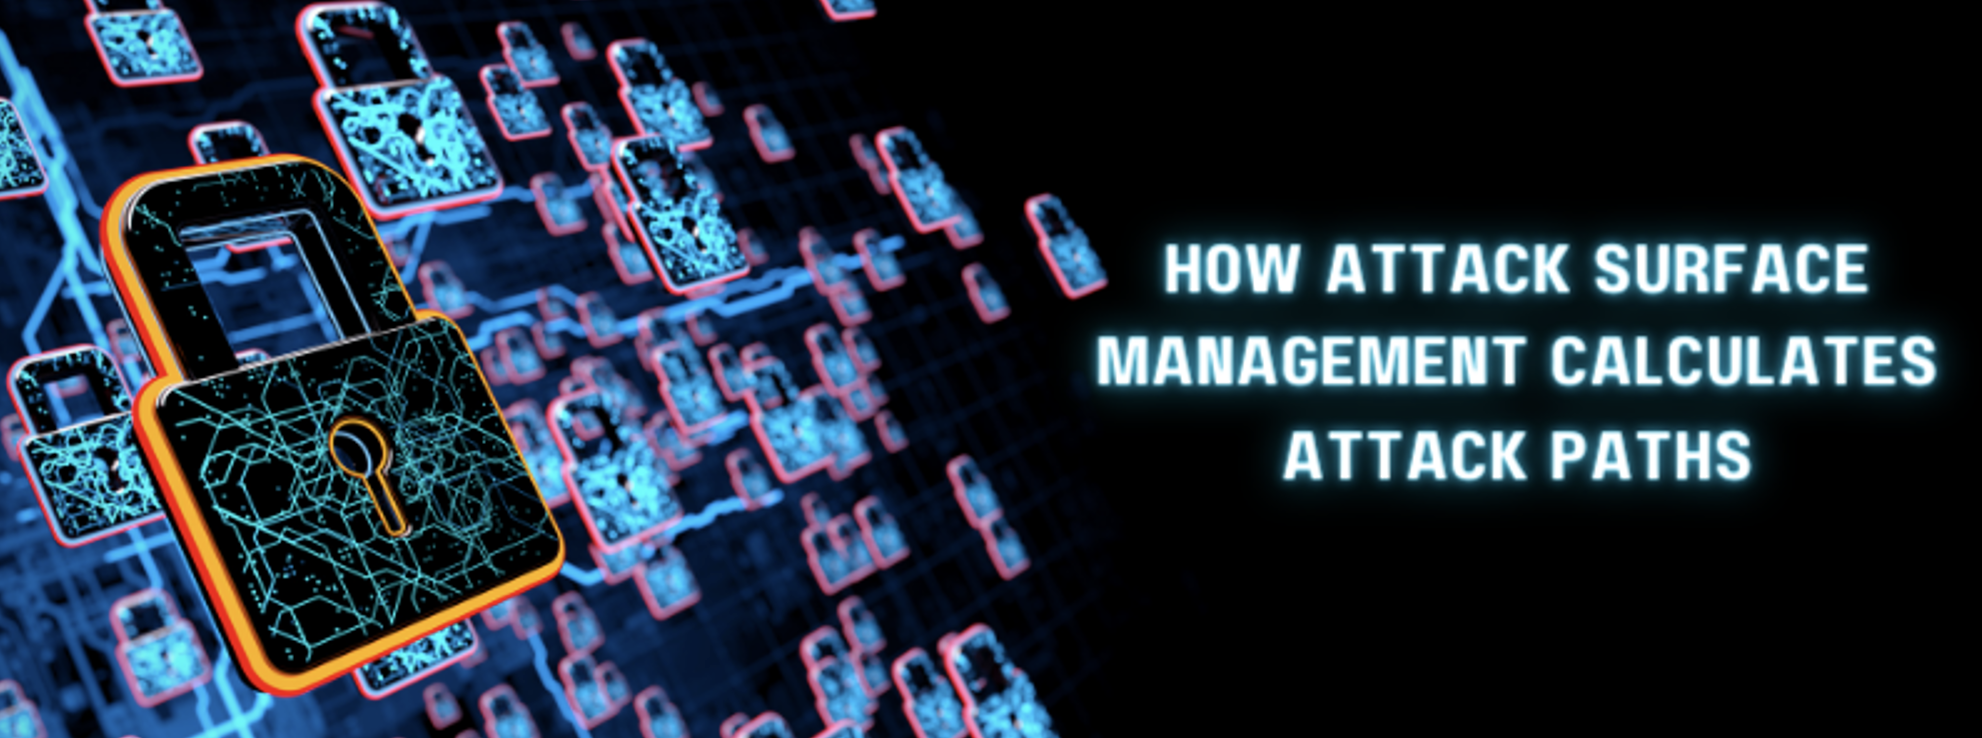 How Attack Surface Management Calculates Attack Paths